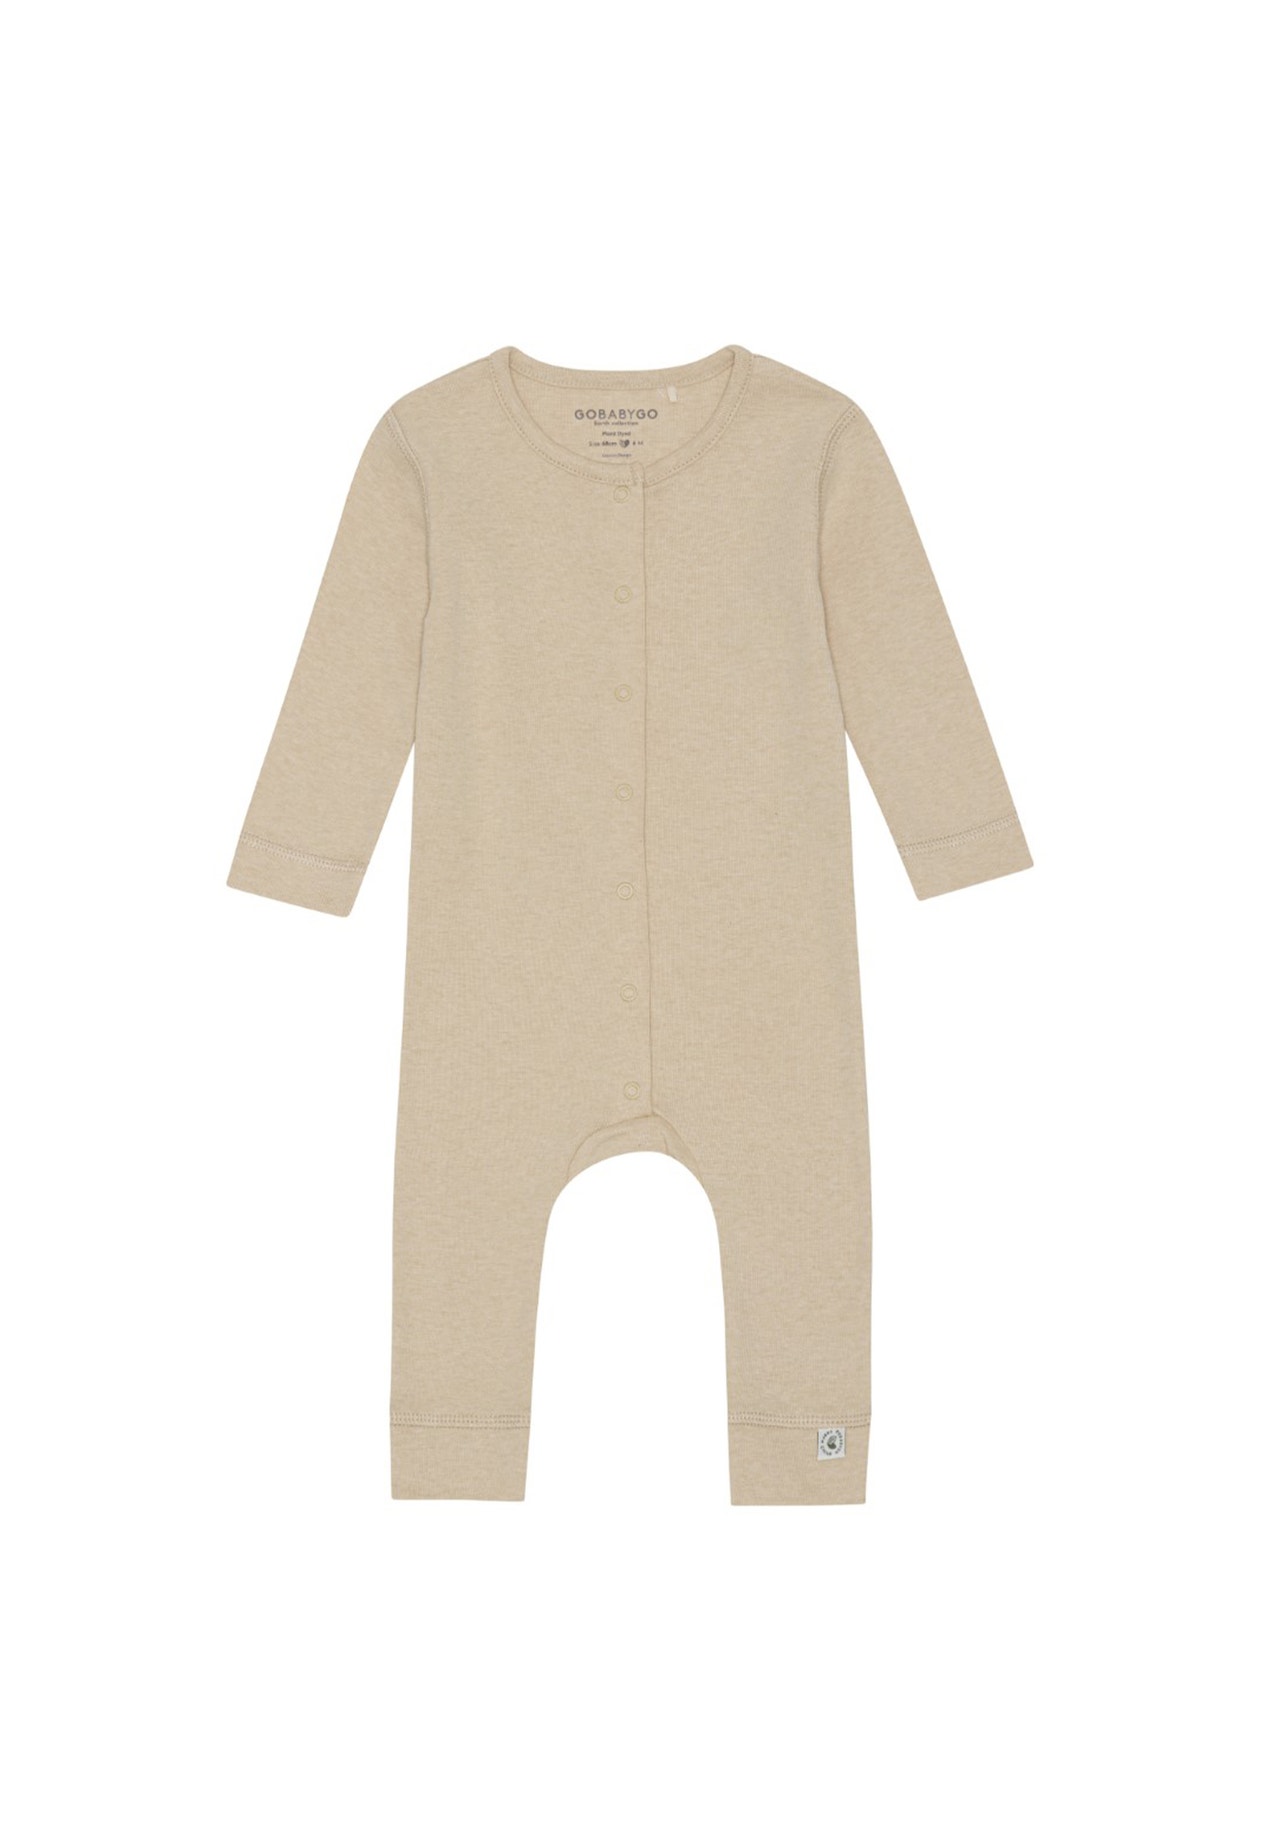 MAMA.LICIOUS Baby one-piece suit -Oat - 33333323